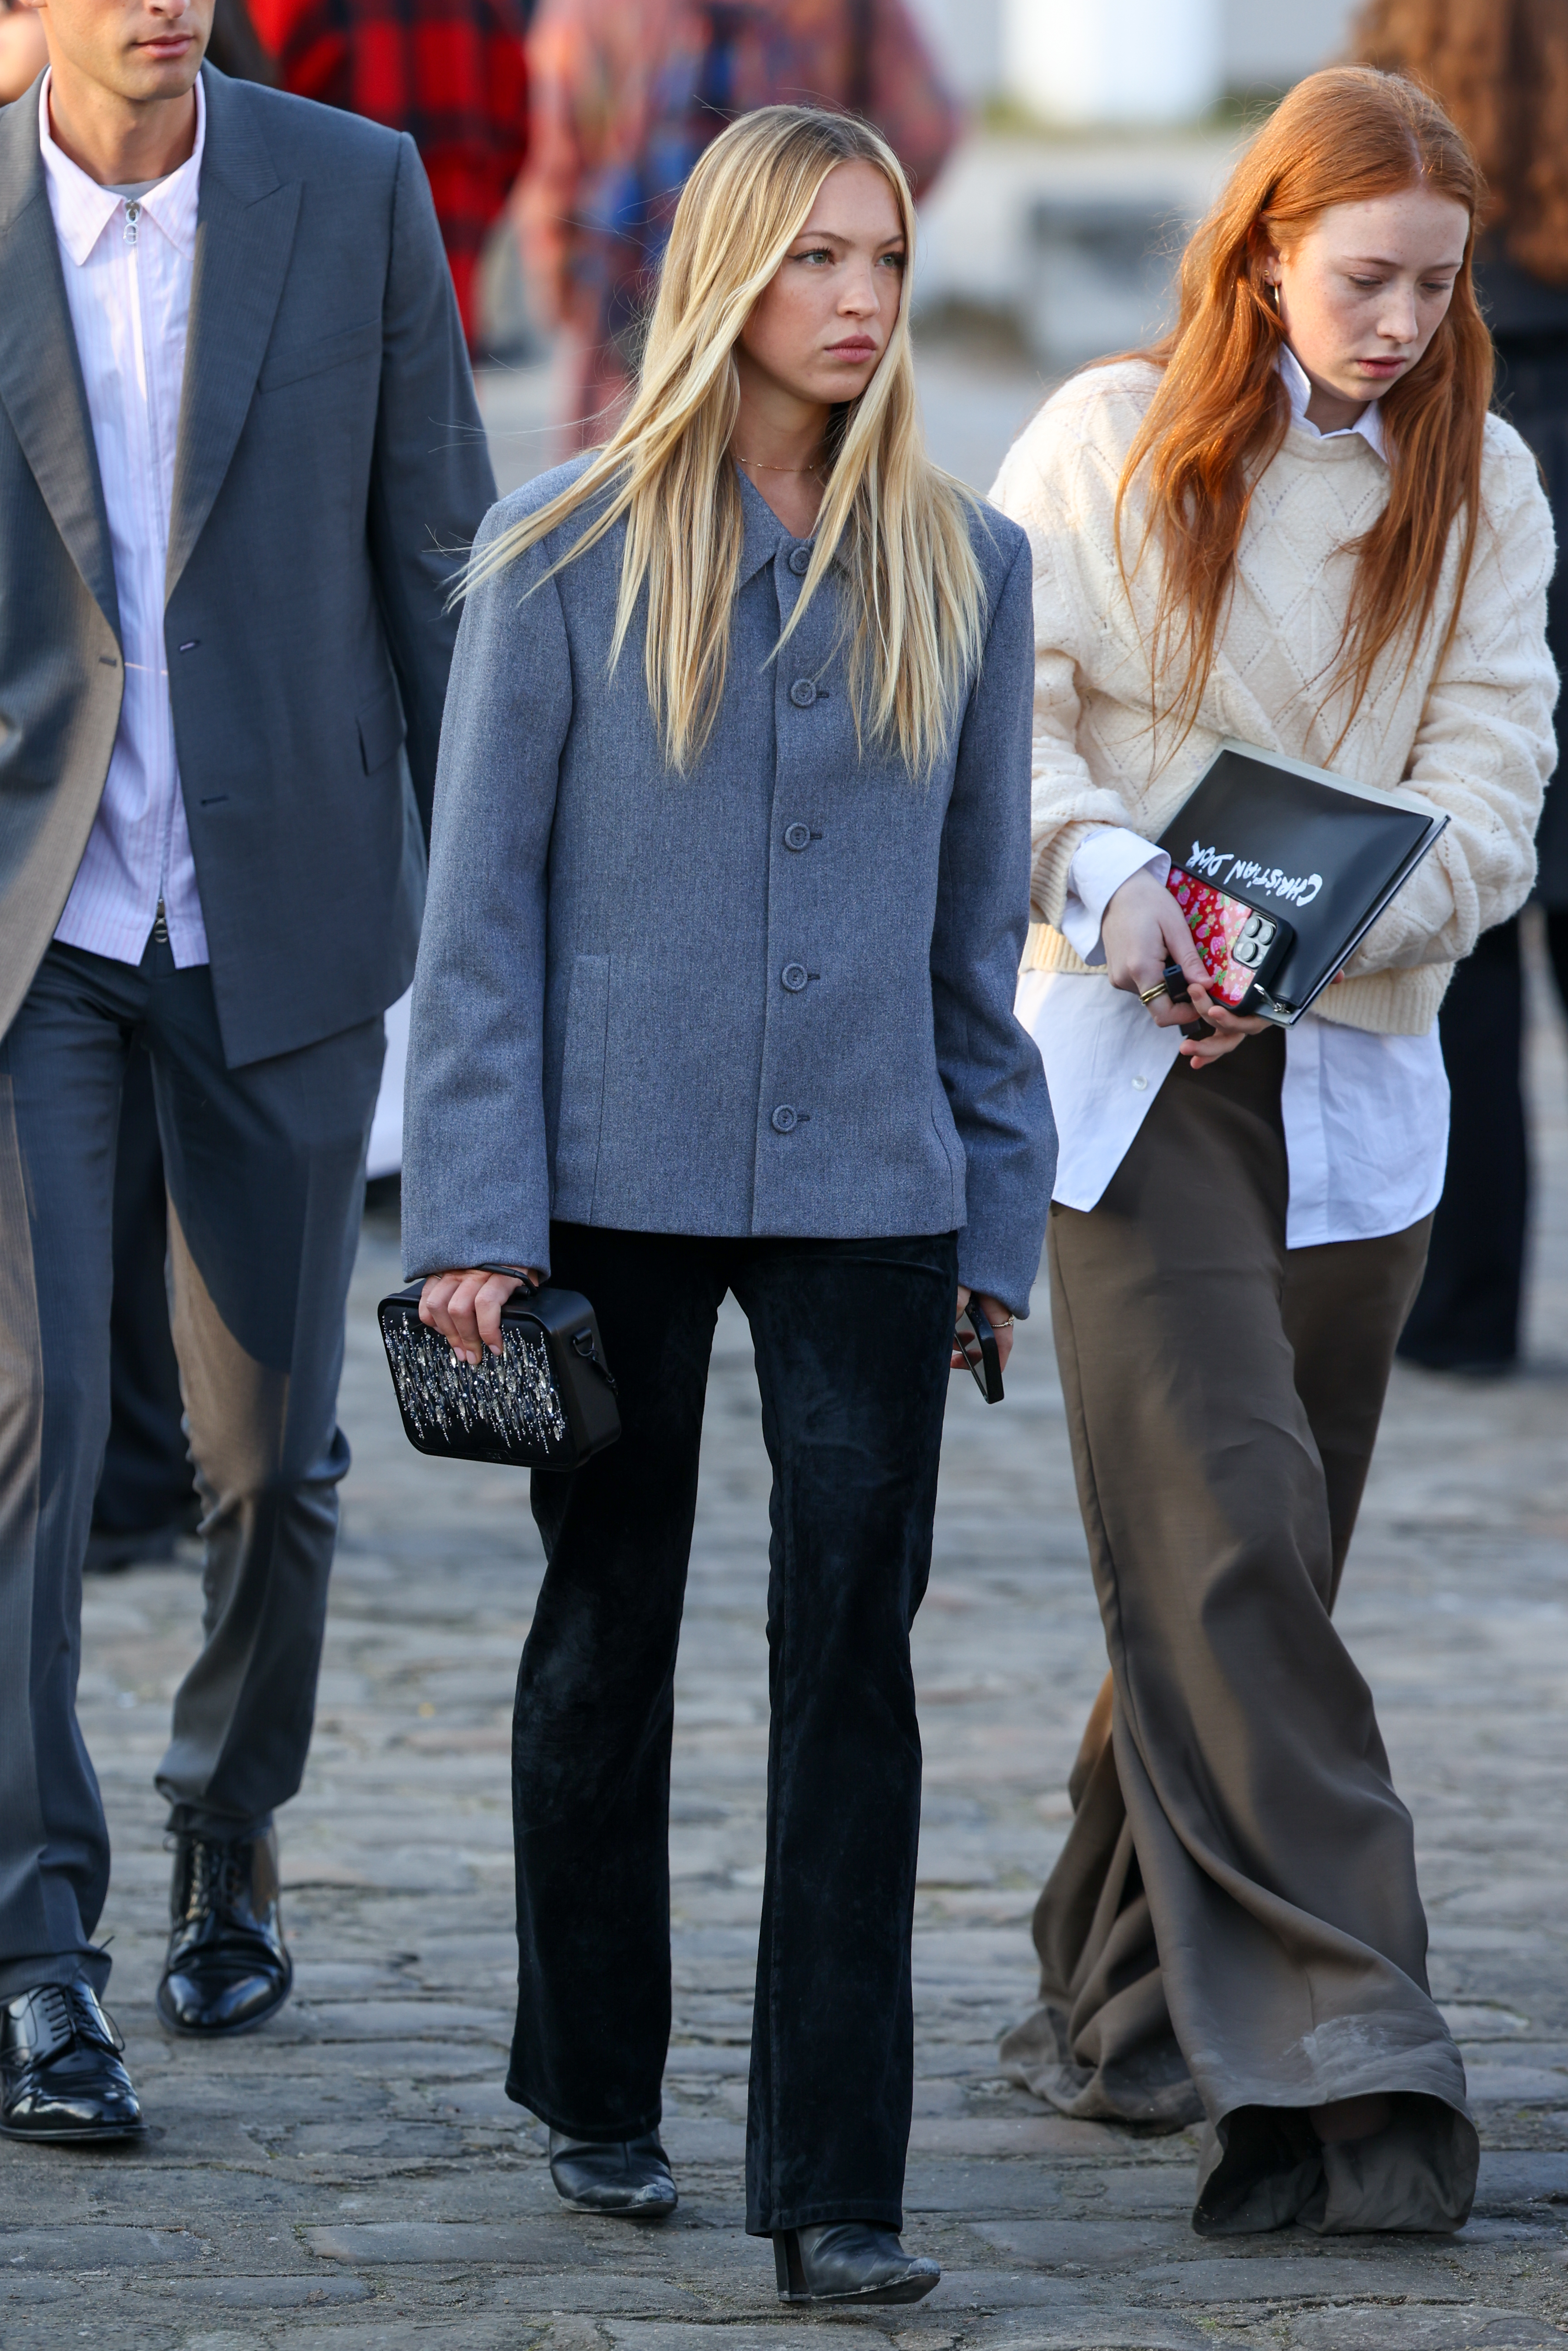 Lila Moss styles a a grey jacket and black trousers.